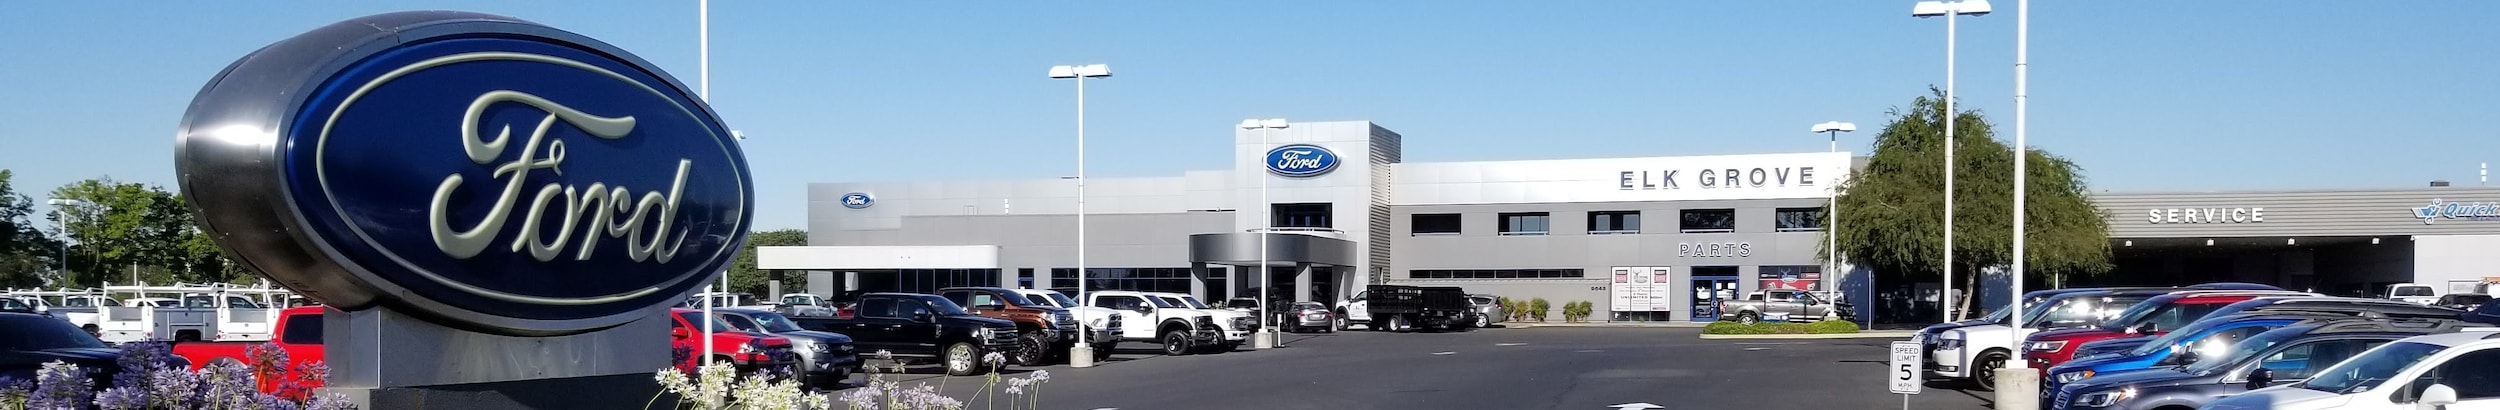 elk grove ford parts hours